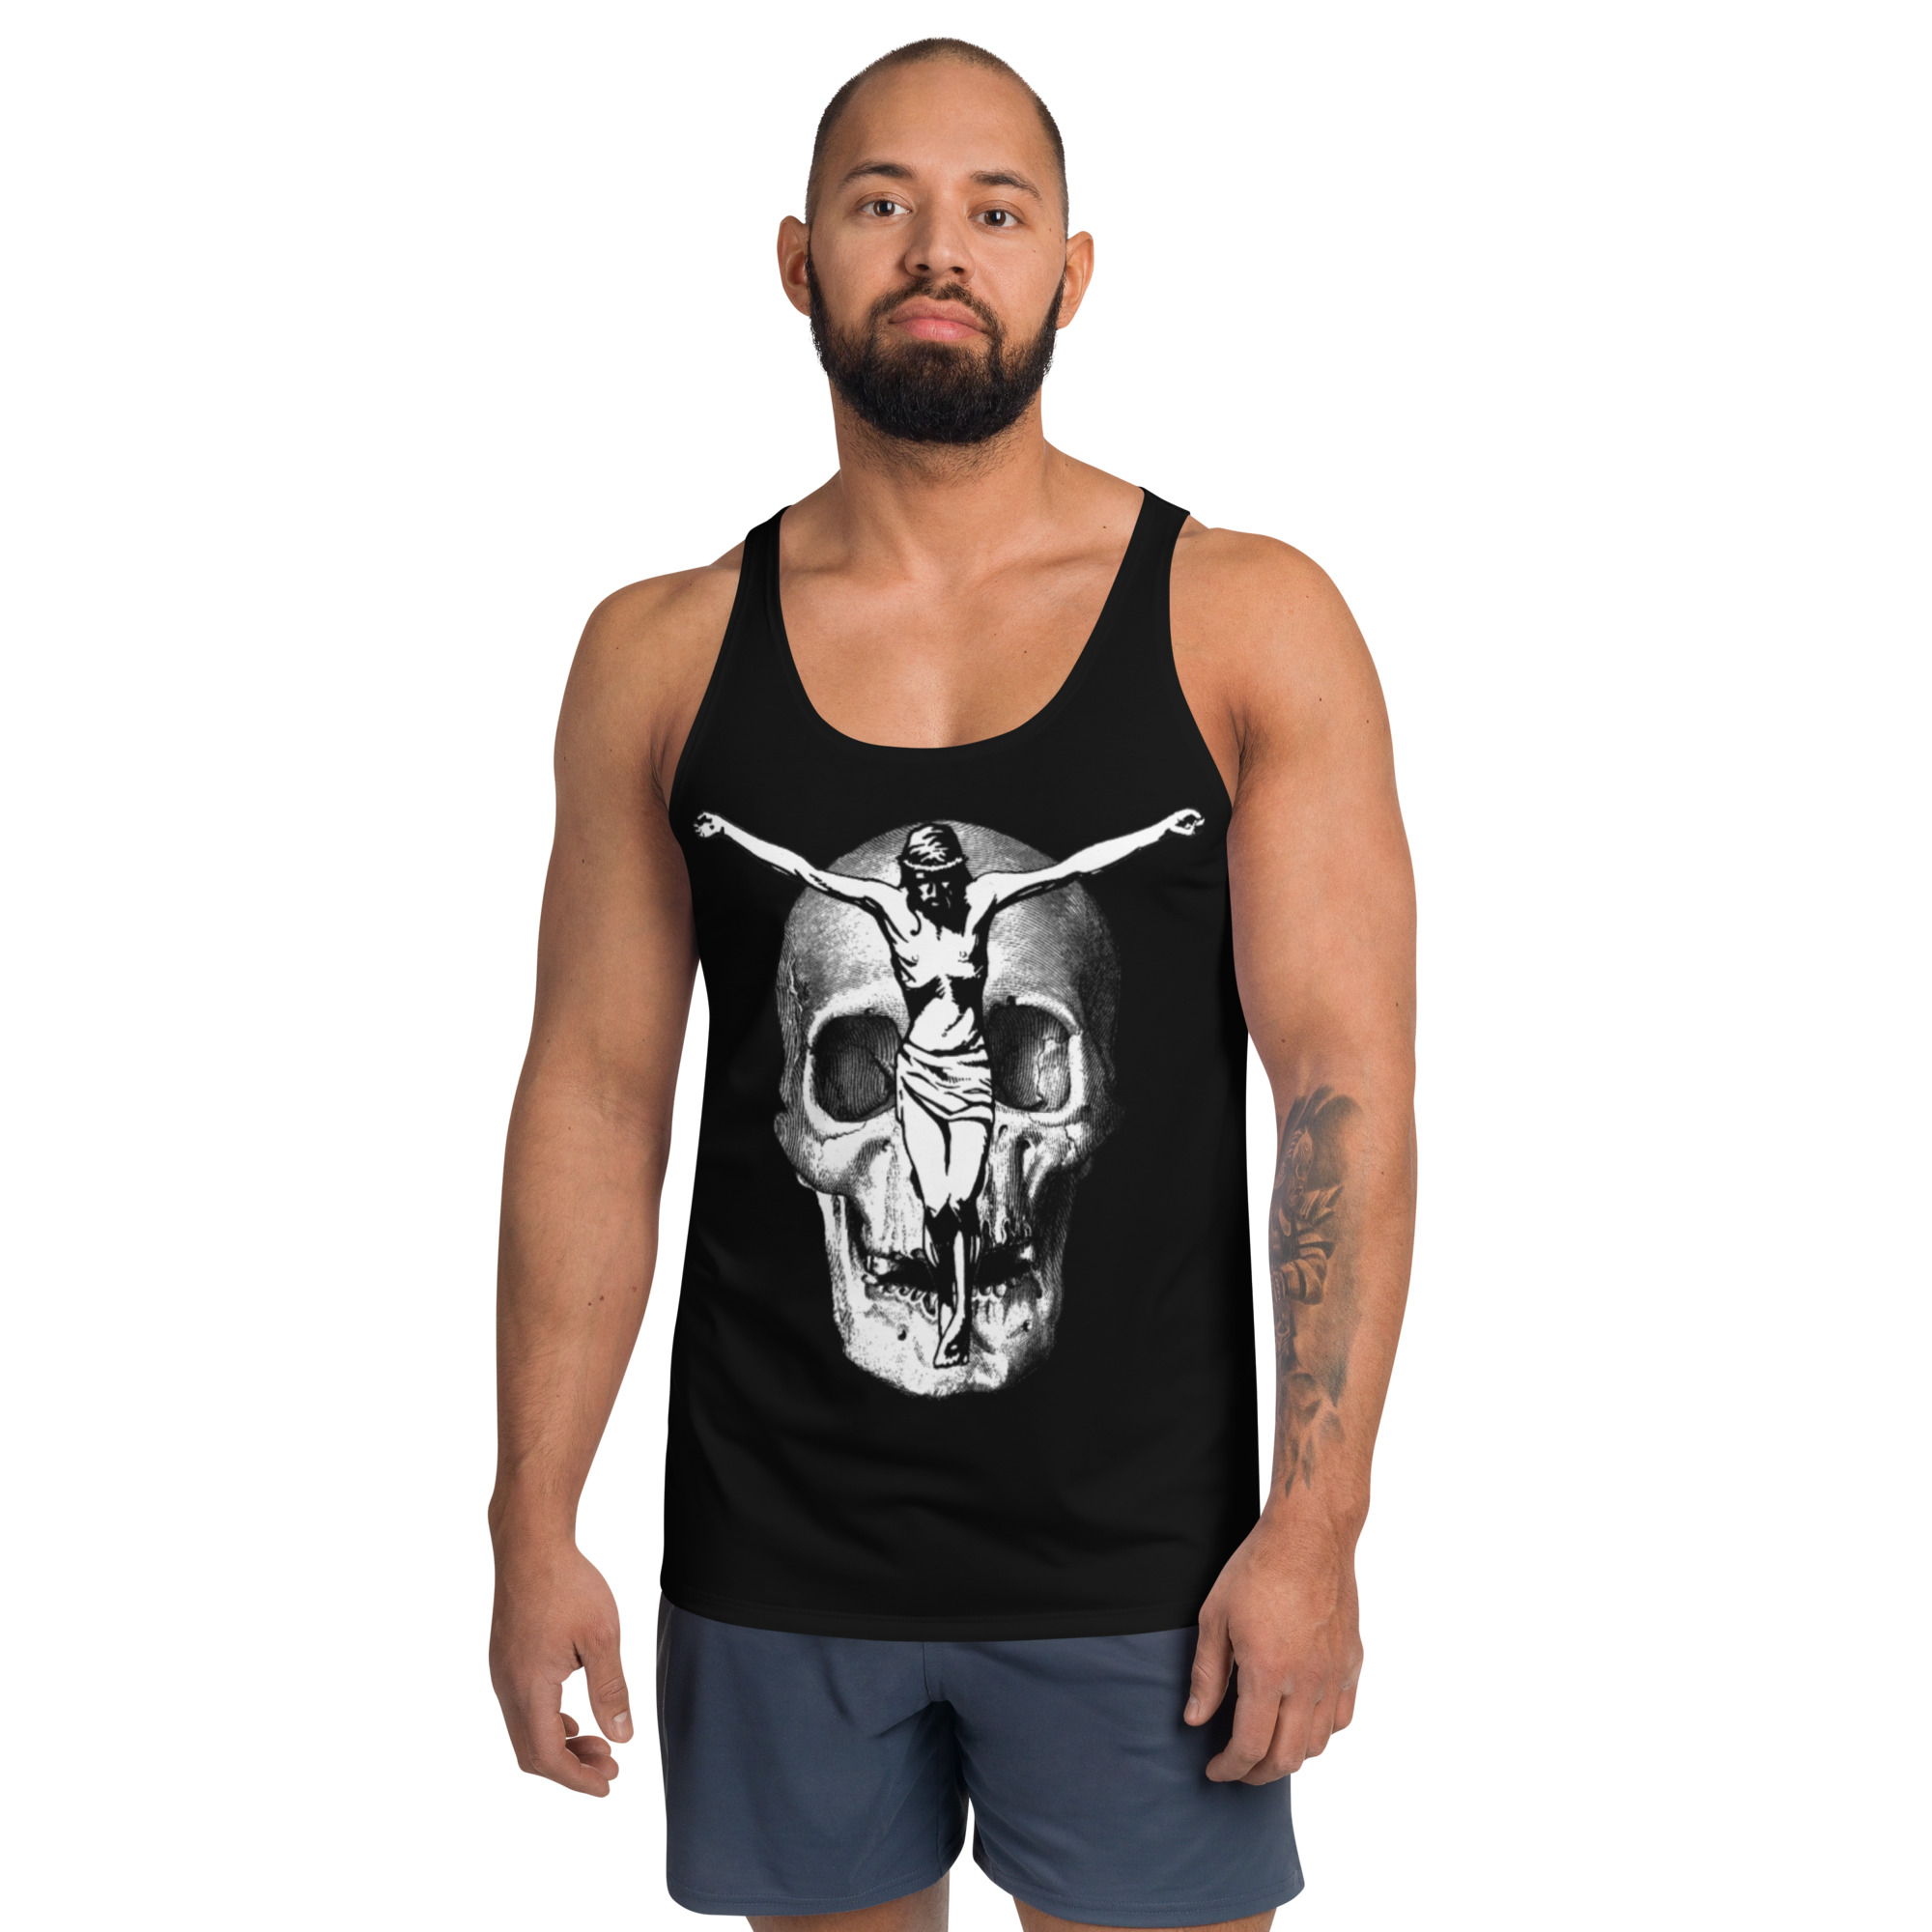 all-over-print-mens-tank-top-white-front-63659399ccde0.jpg